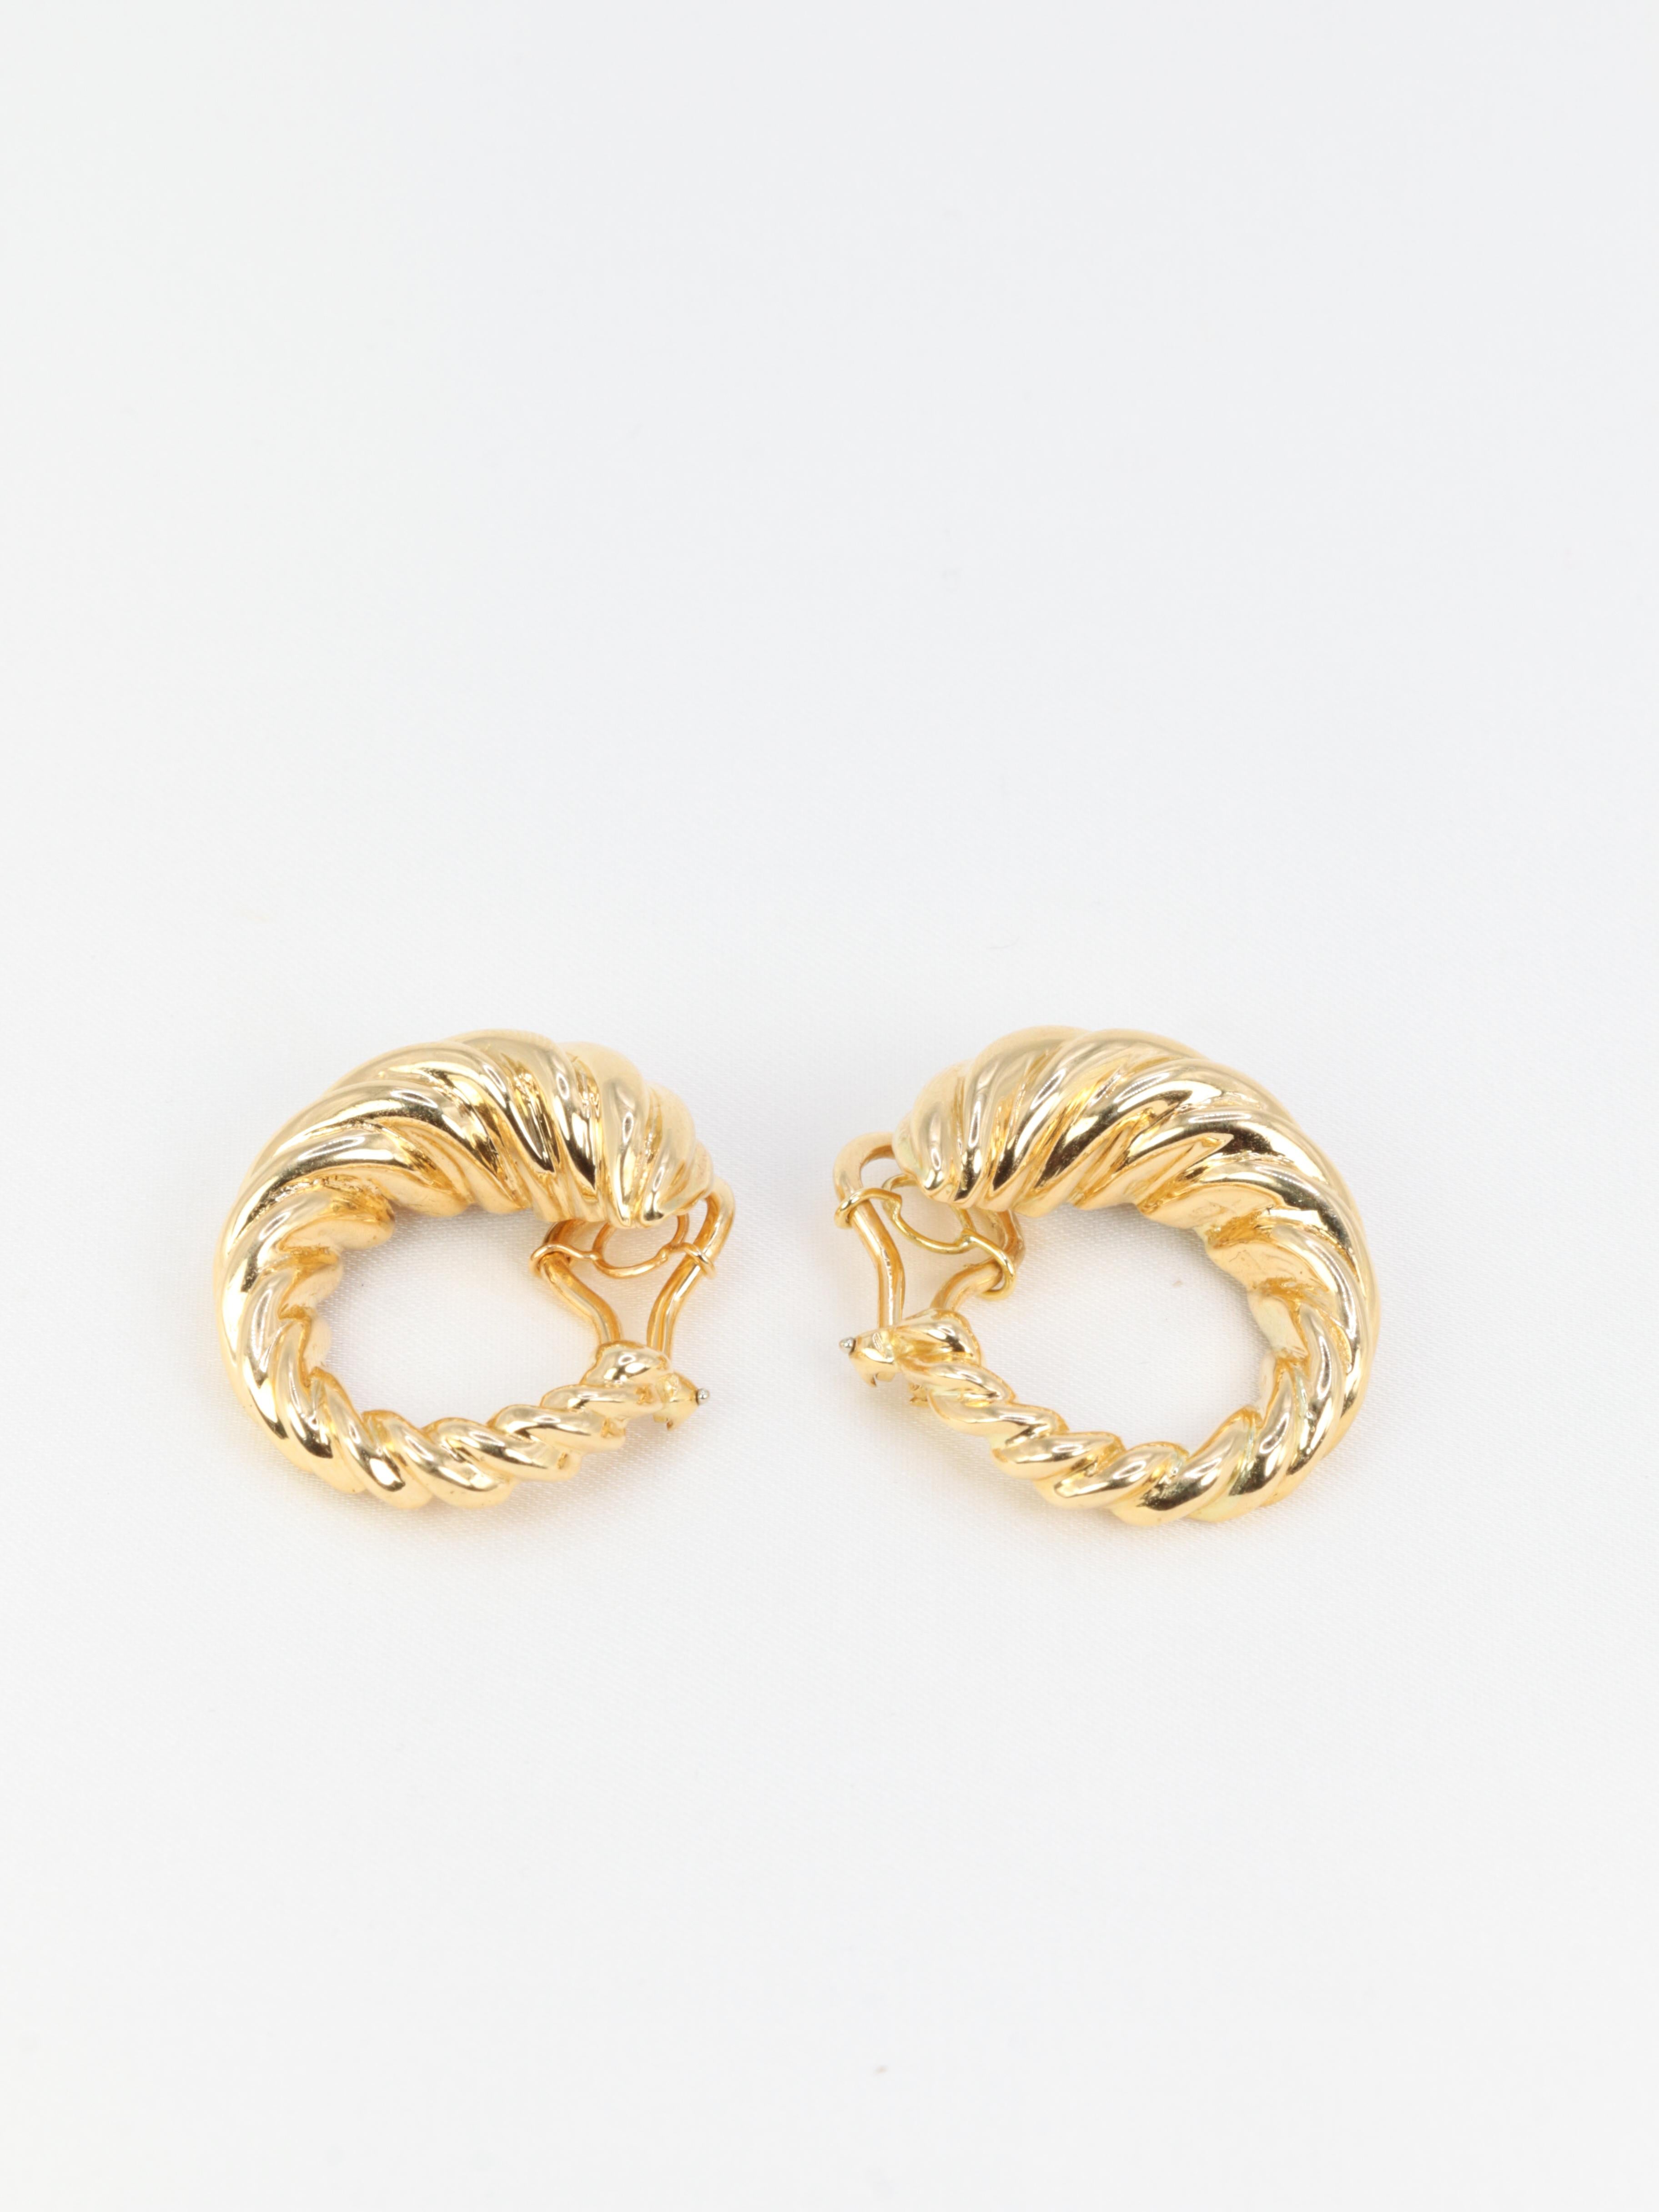 Women's or Men's Pair of Vintage Ear Clips in Yellow Gold